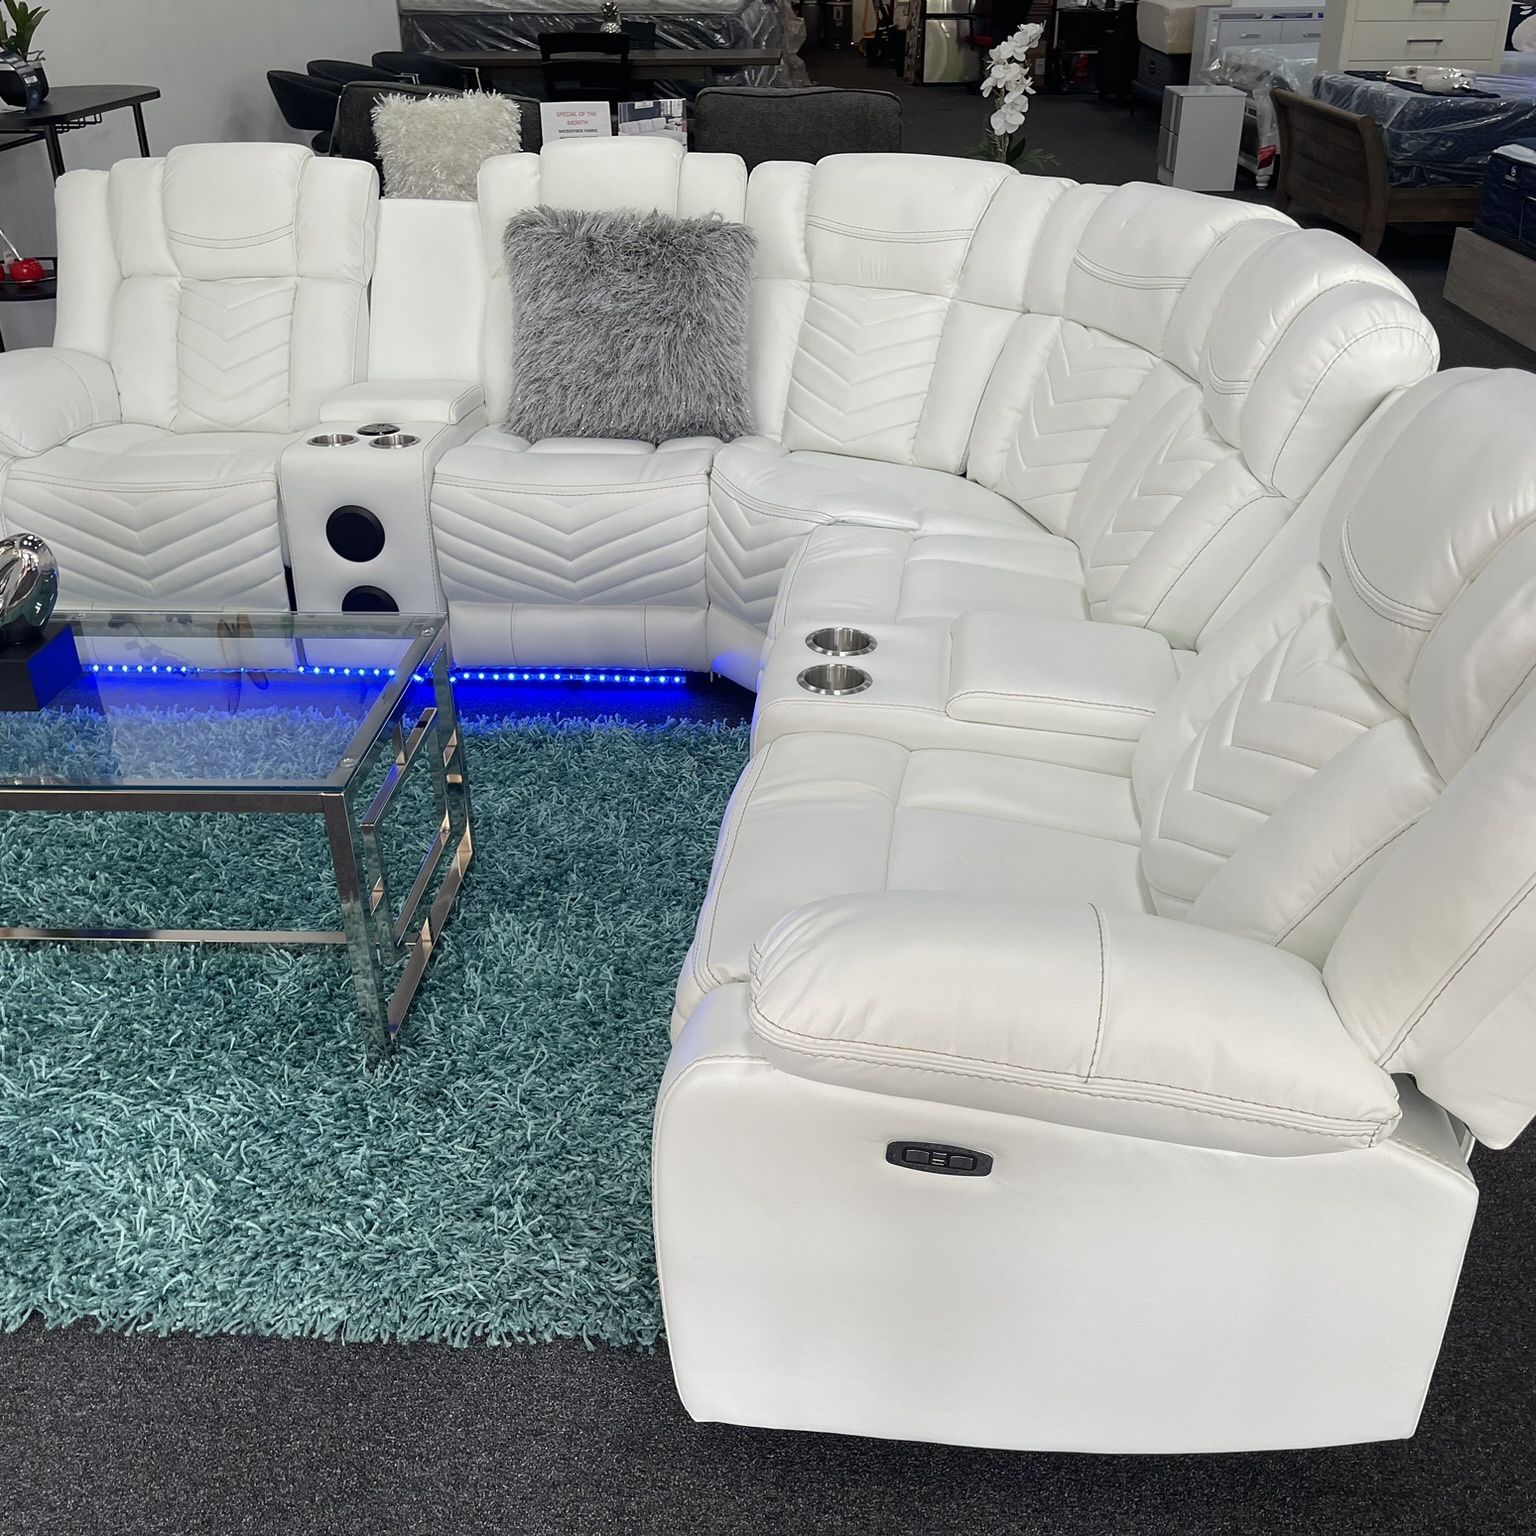 🔥POWER MOTION SECTIONAL WITH BLUETOOTH SPEAKER AVAILABLE IN BLACK OR GREY🔥